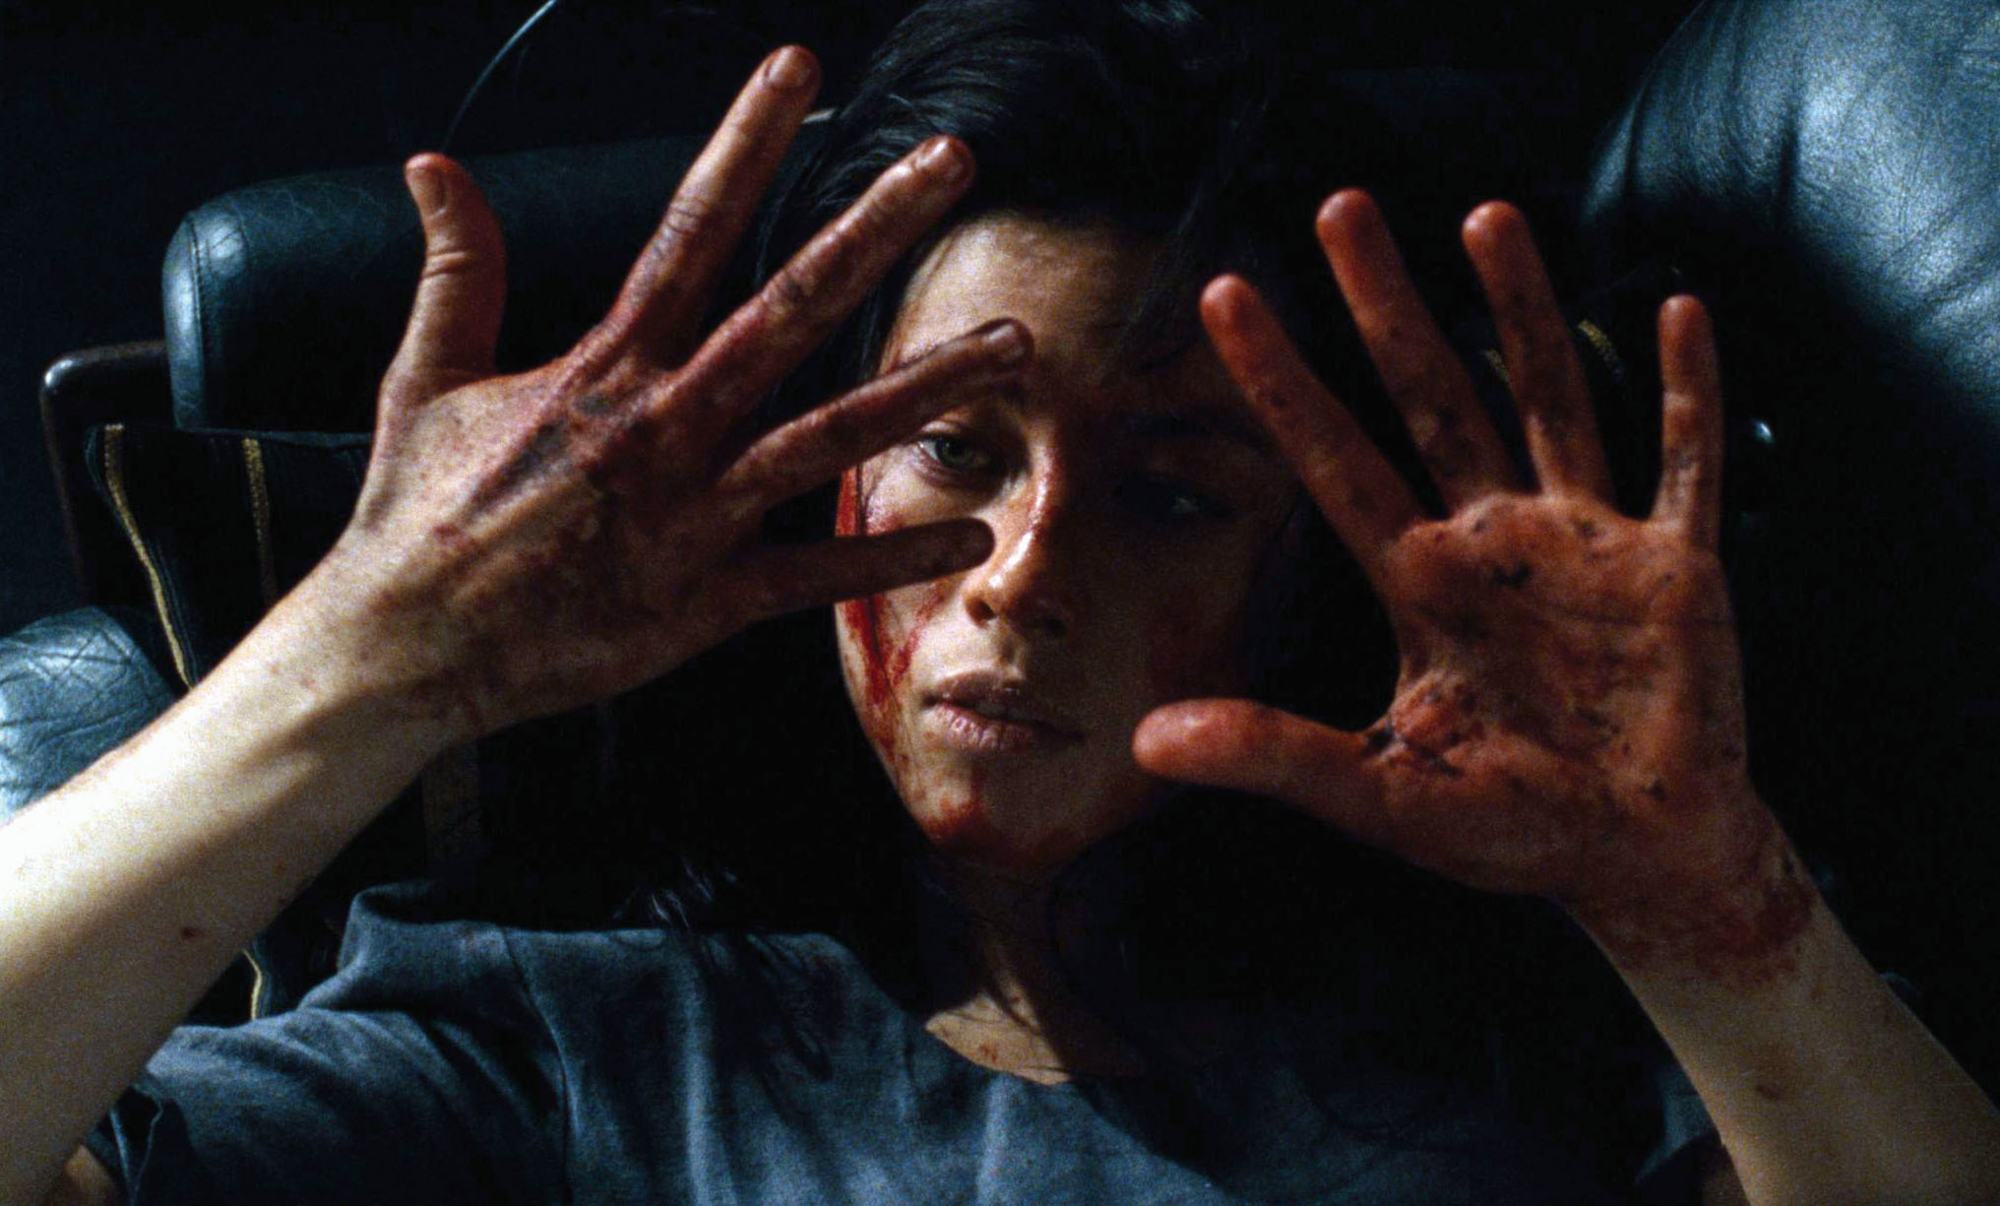 'Martyrs' Mylène Jampanoï as Lucie looking at her hands, which are covered in dried blood